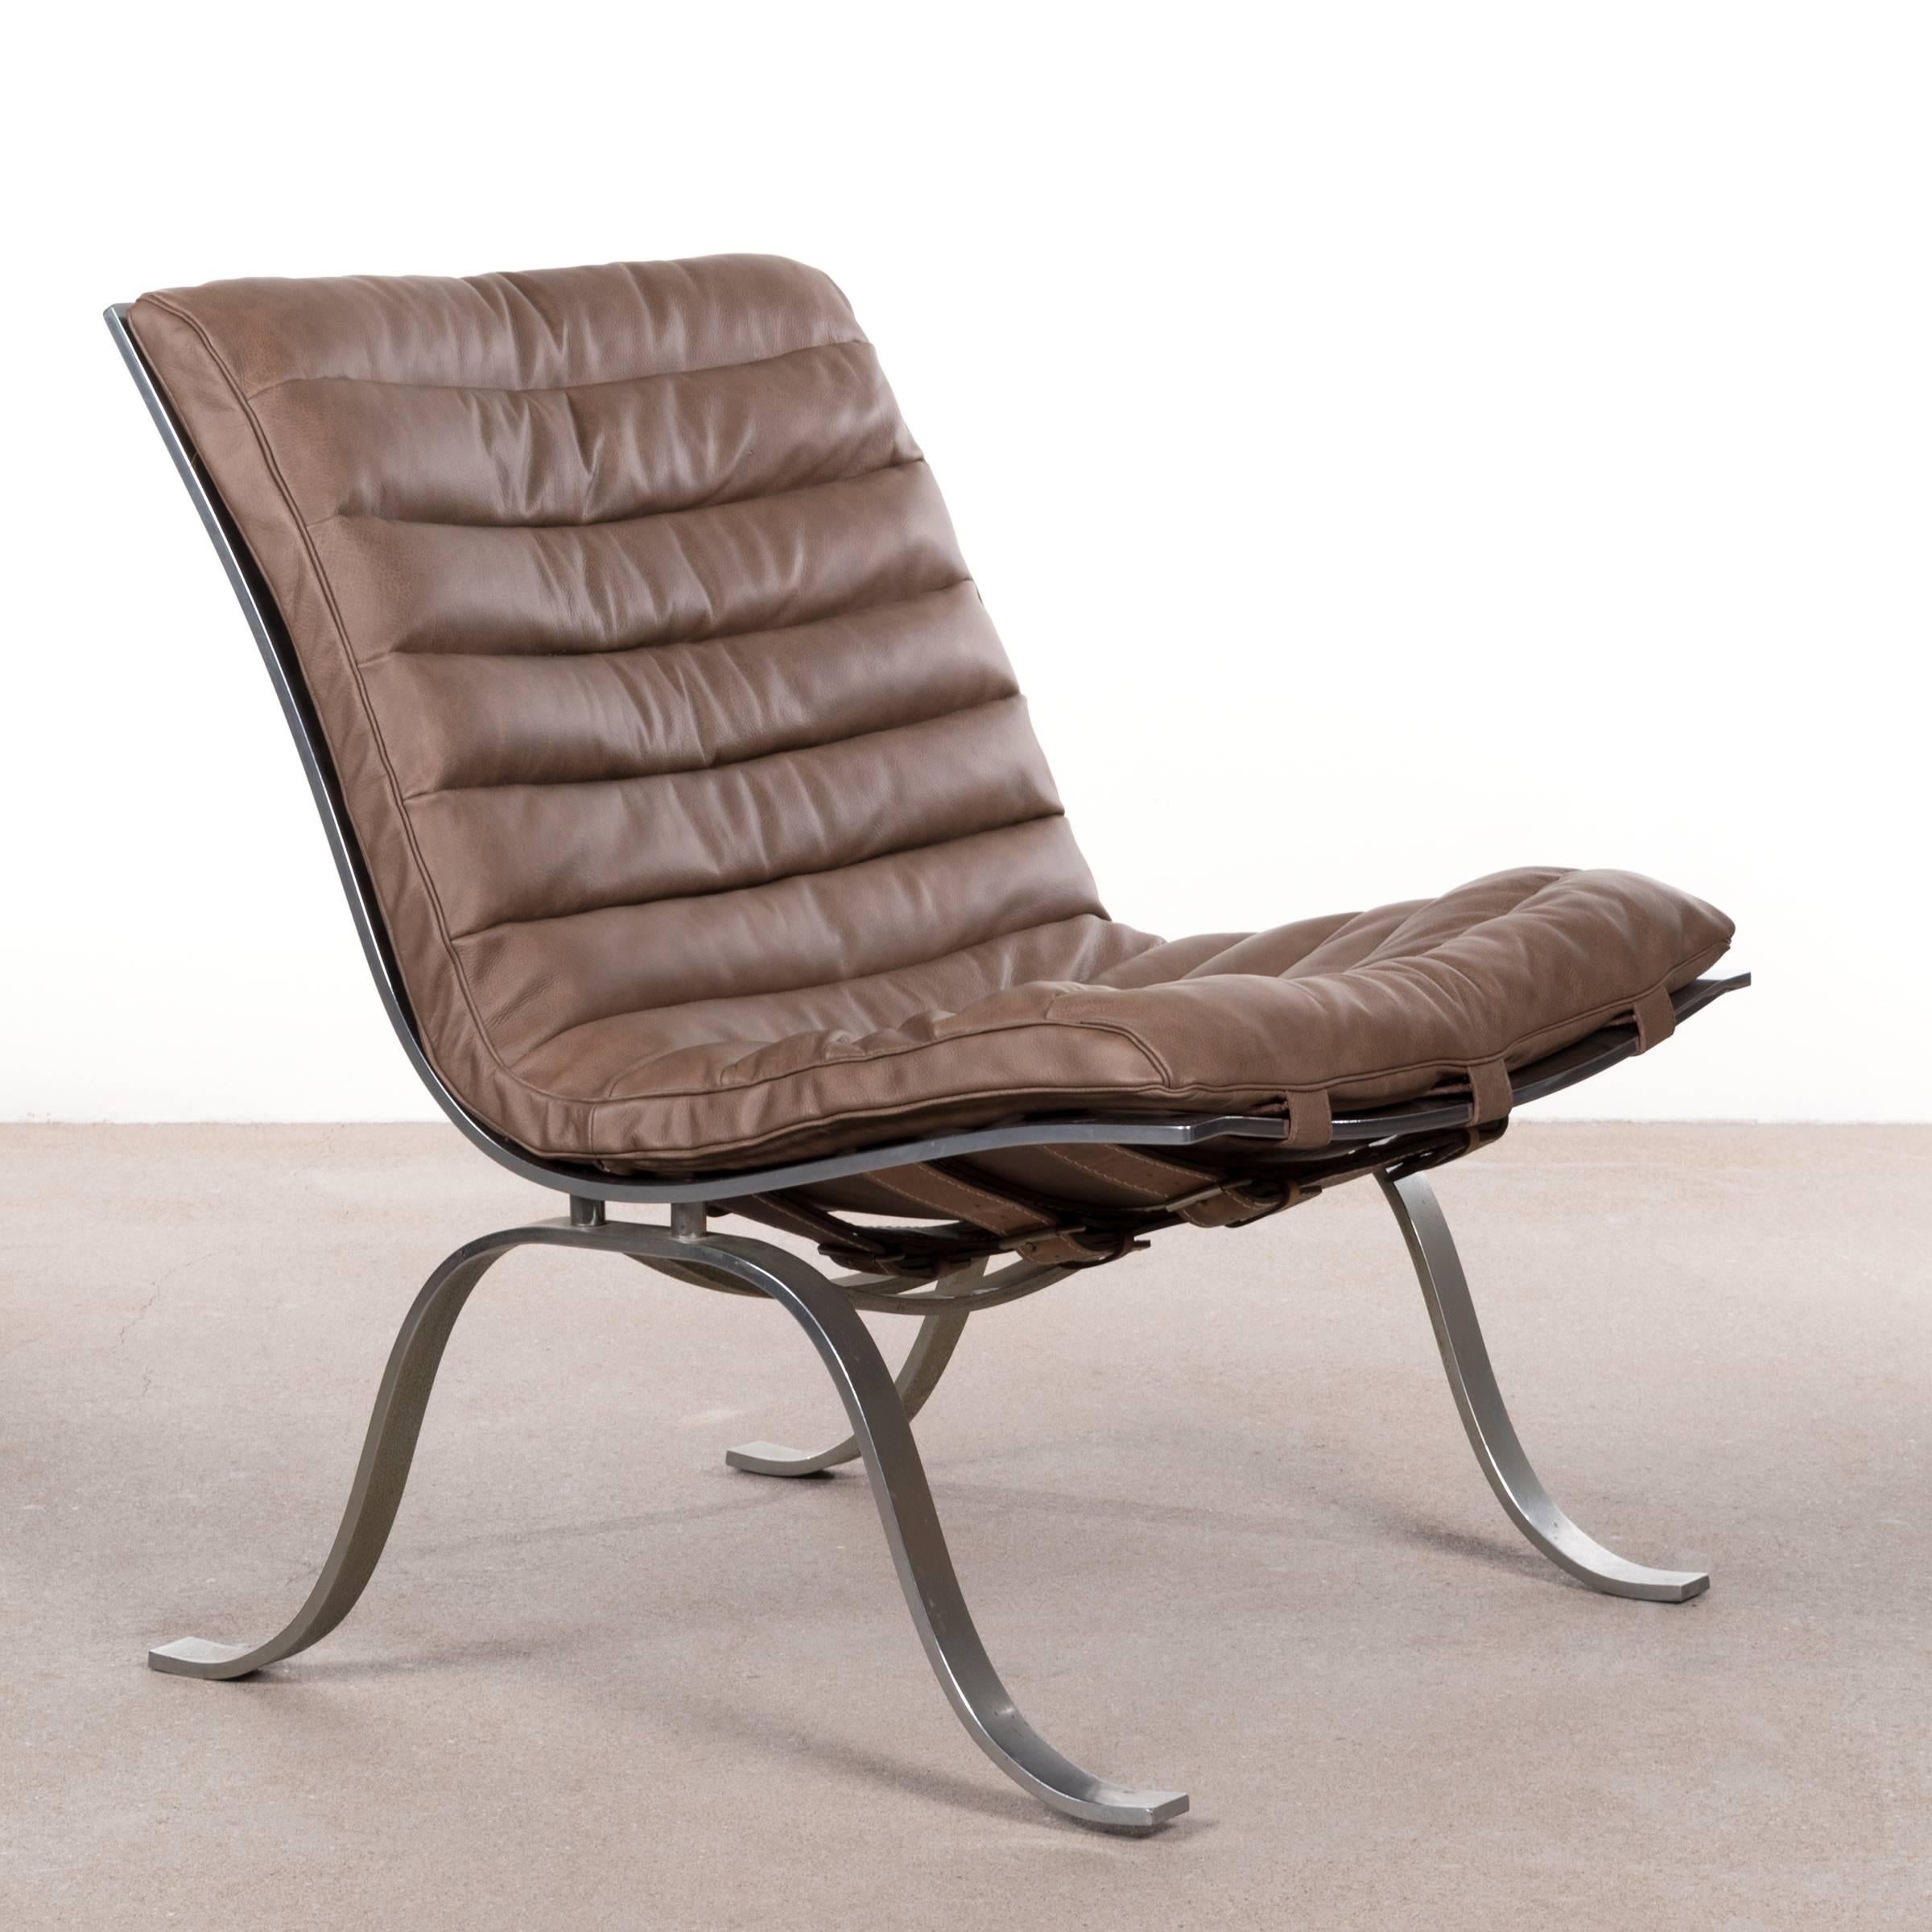 Swedish Arne Norell Ariet Leather Lounge Chair, Sweden